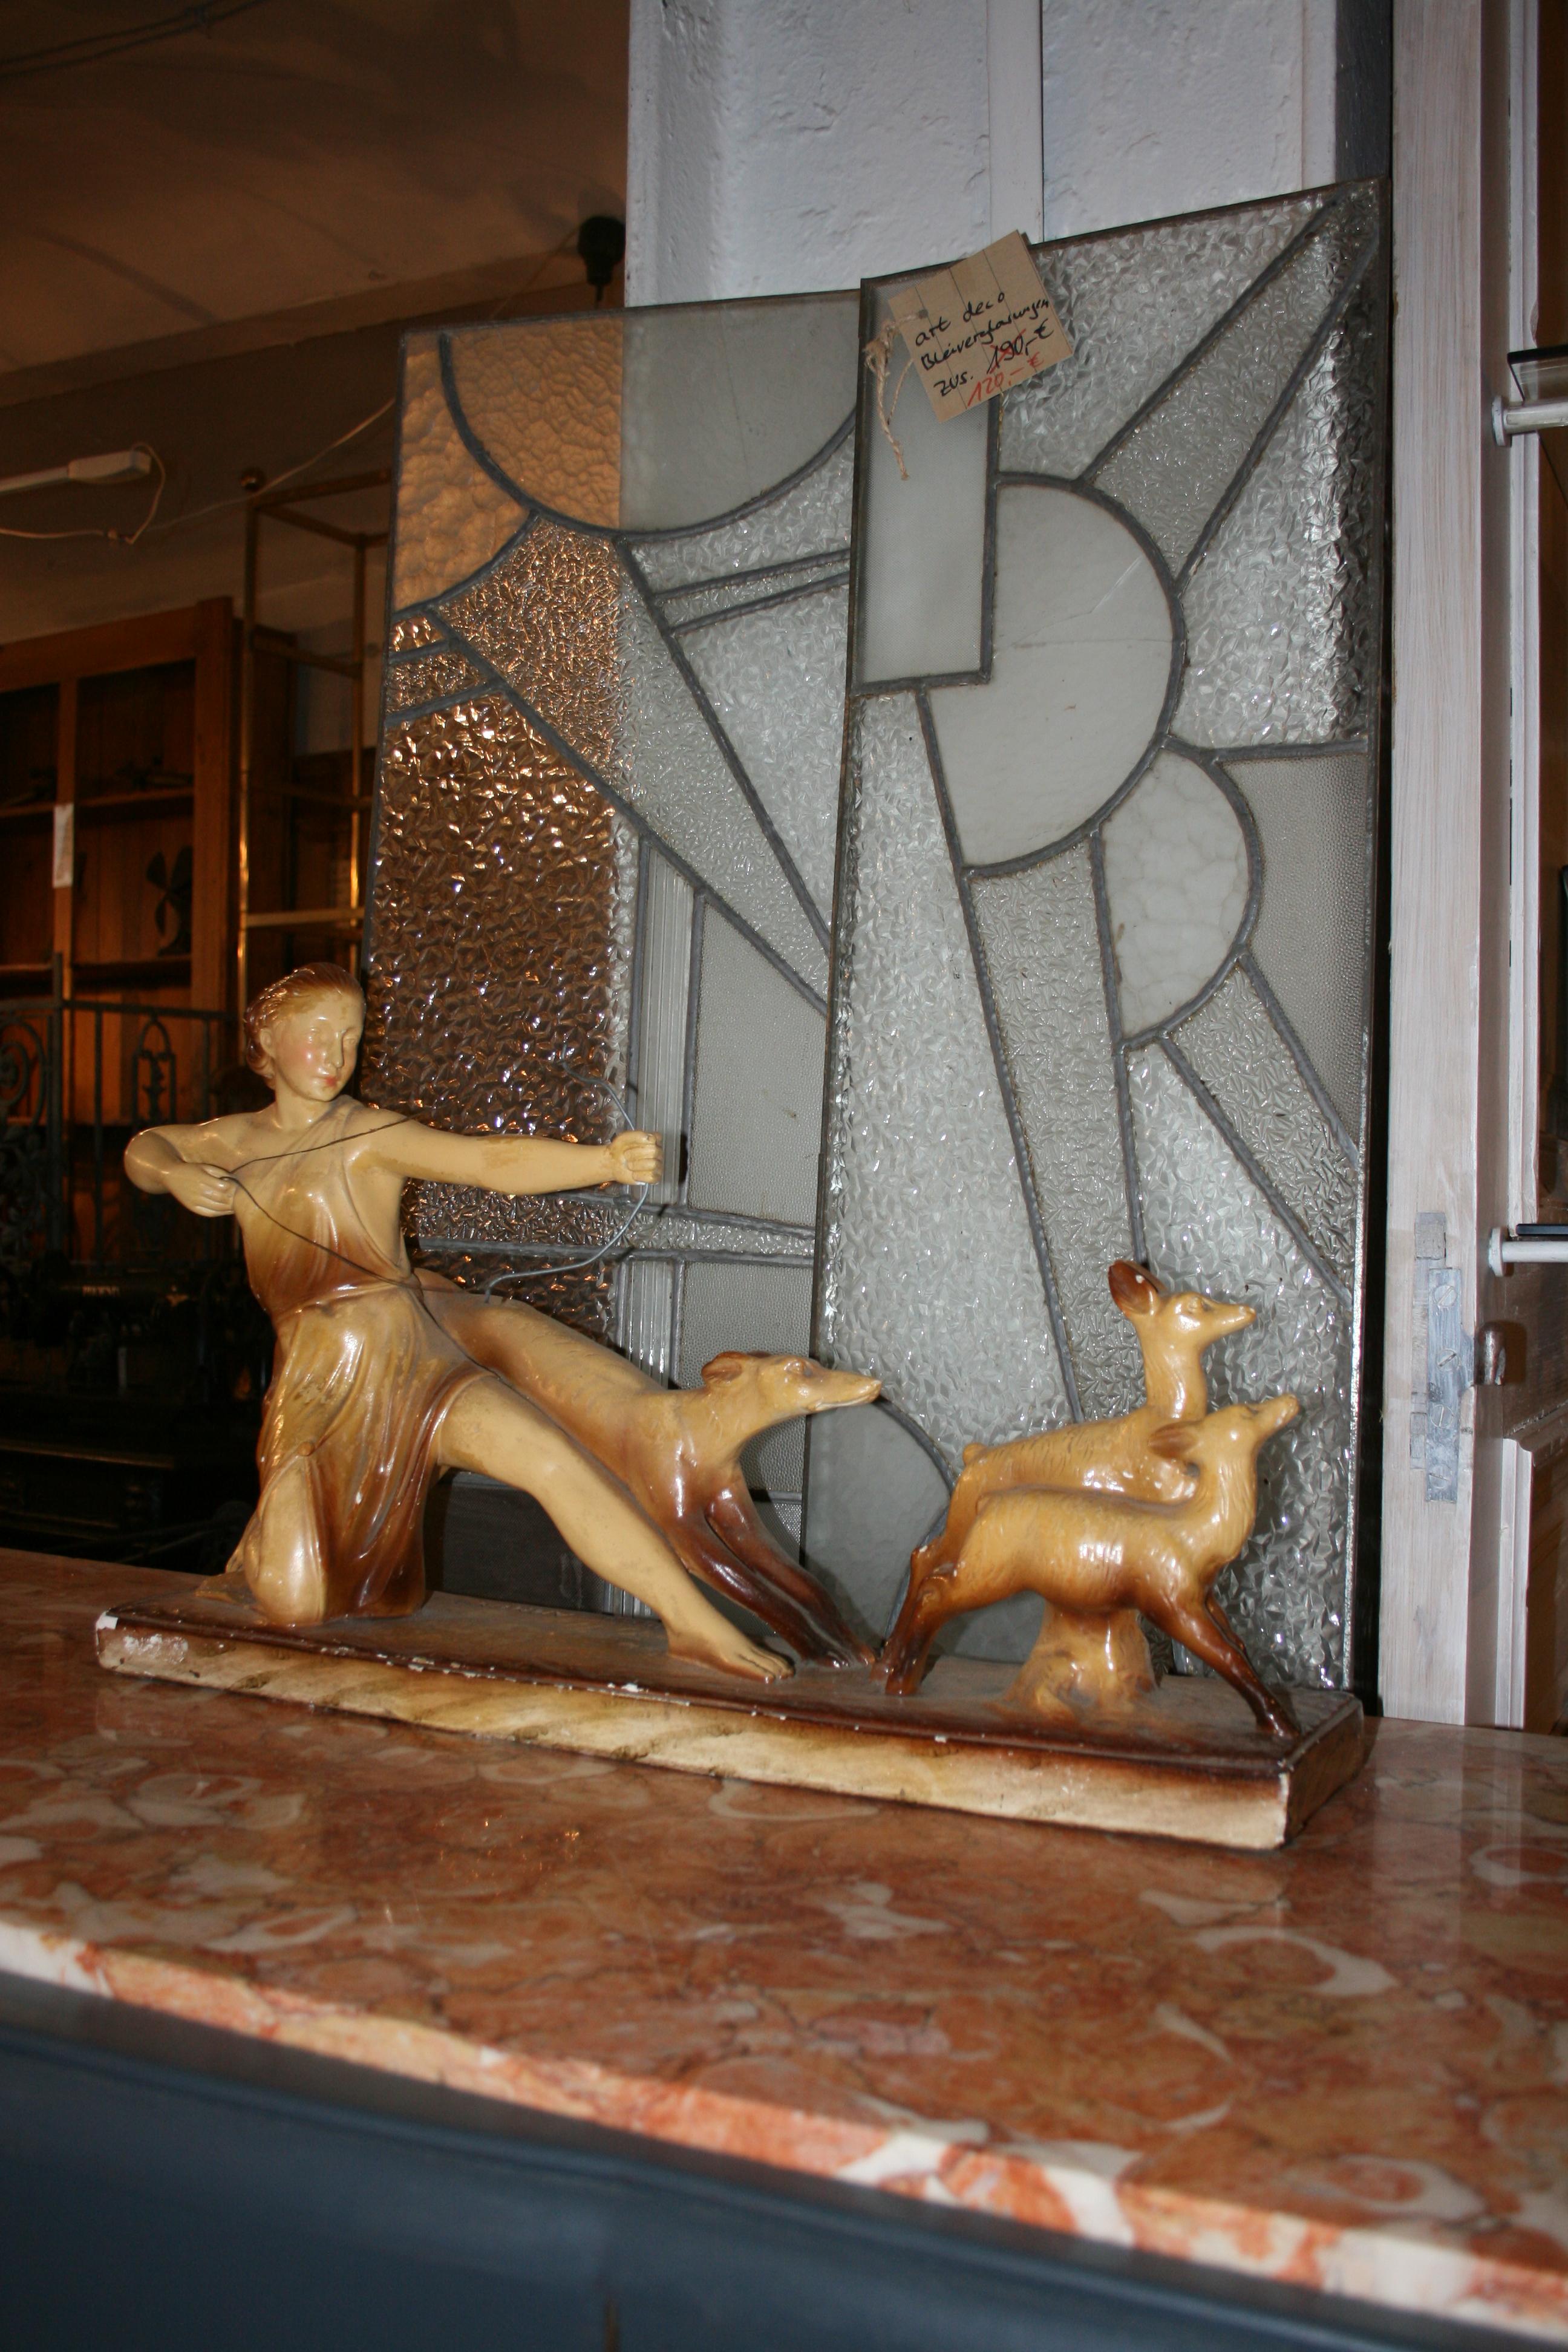 French 1930s Art Deco sculpture made of hand painted plaster with engraving on the pedestal 